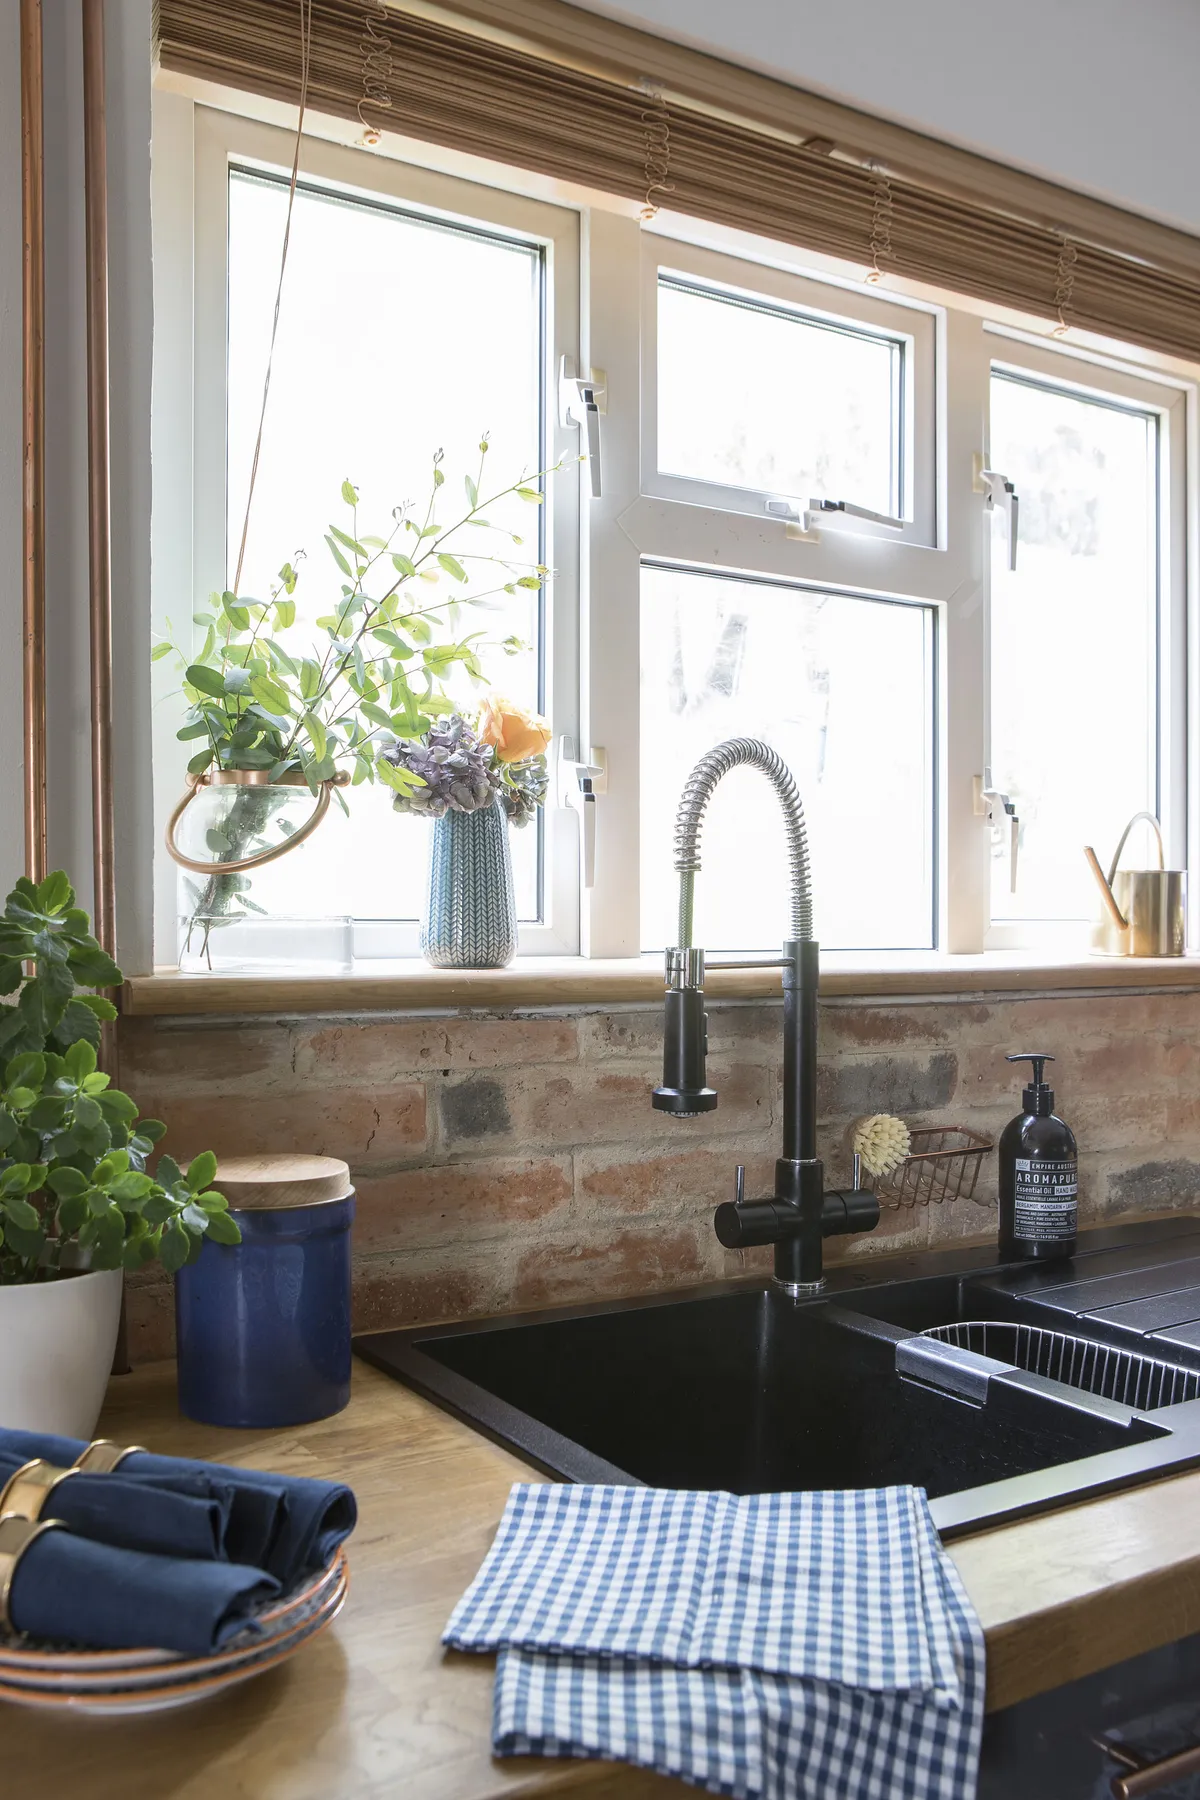 An easy-to-maintain black composite sink with a chunky hose tap is a functional choice for an industrial aesthetic. Dace moved the sink in front of the window to overlook the garden, a concept new to her that she’s grown to like since moving to the UK